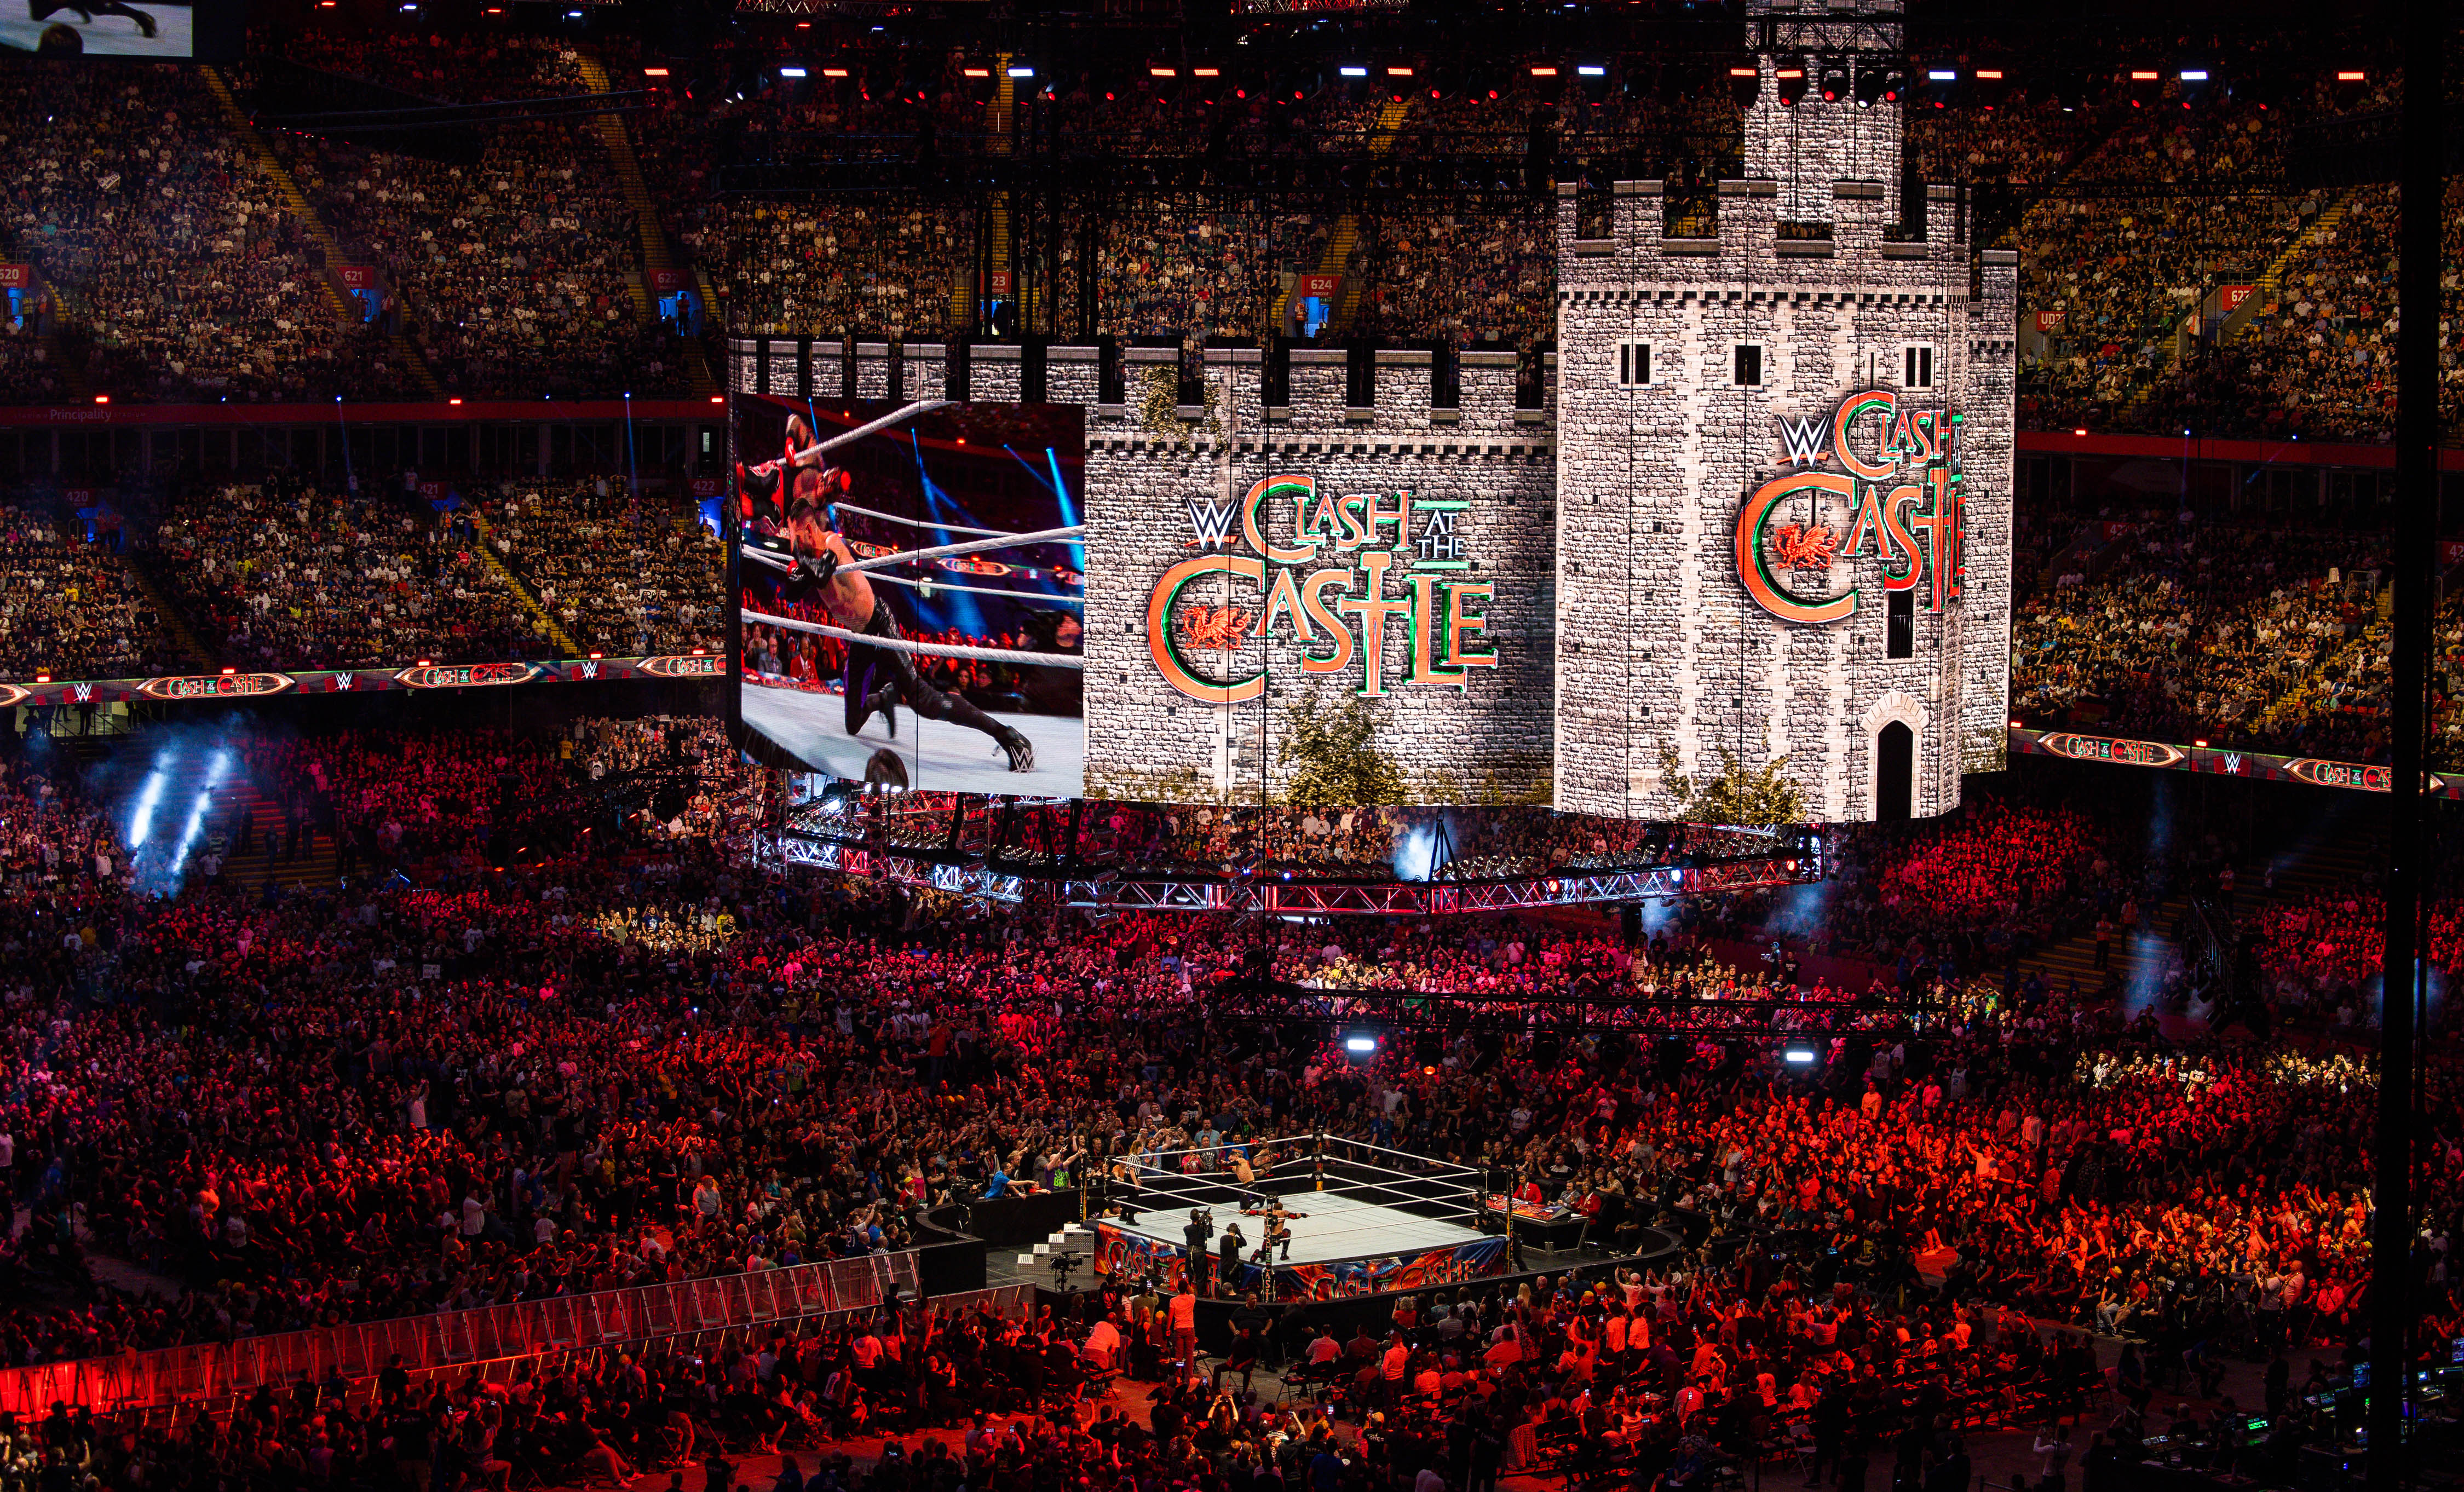 WRU CEO WELCOMES WWE’S ECONOMIC IMPACT RESULTS